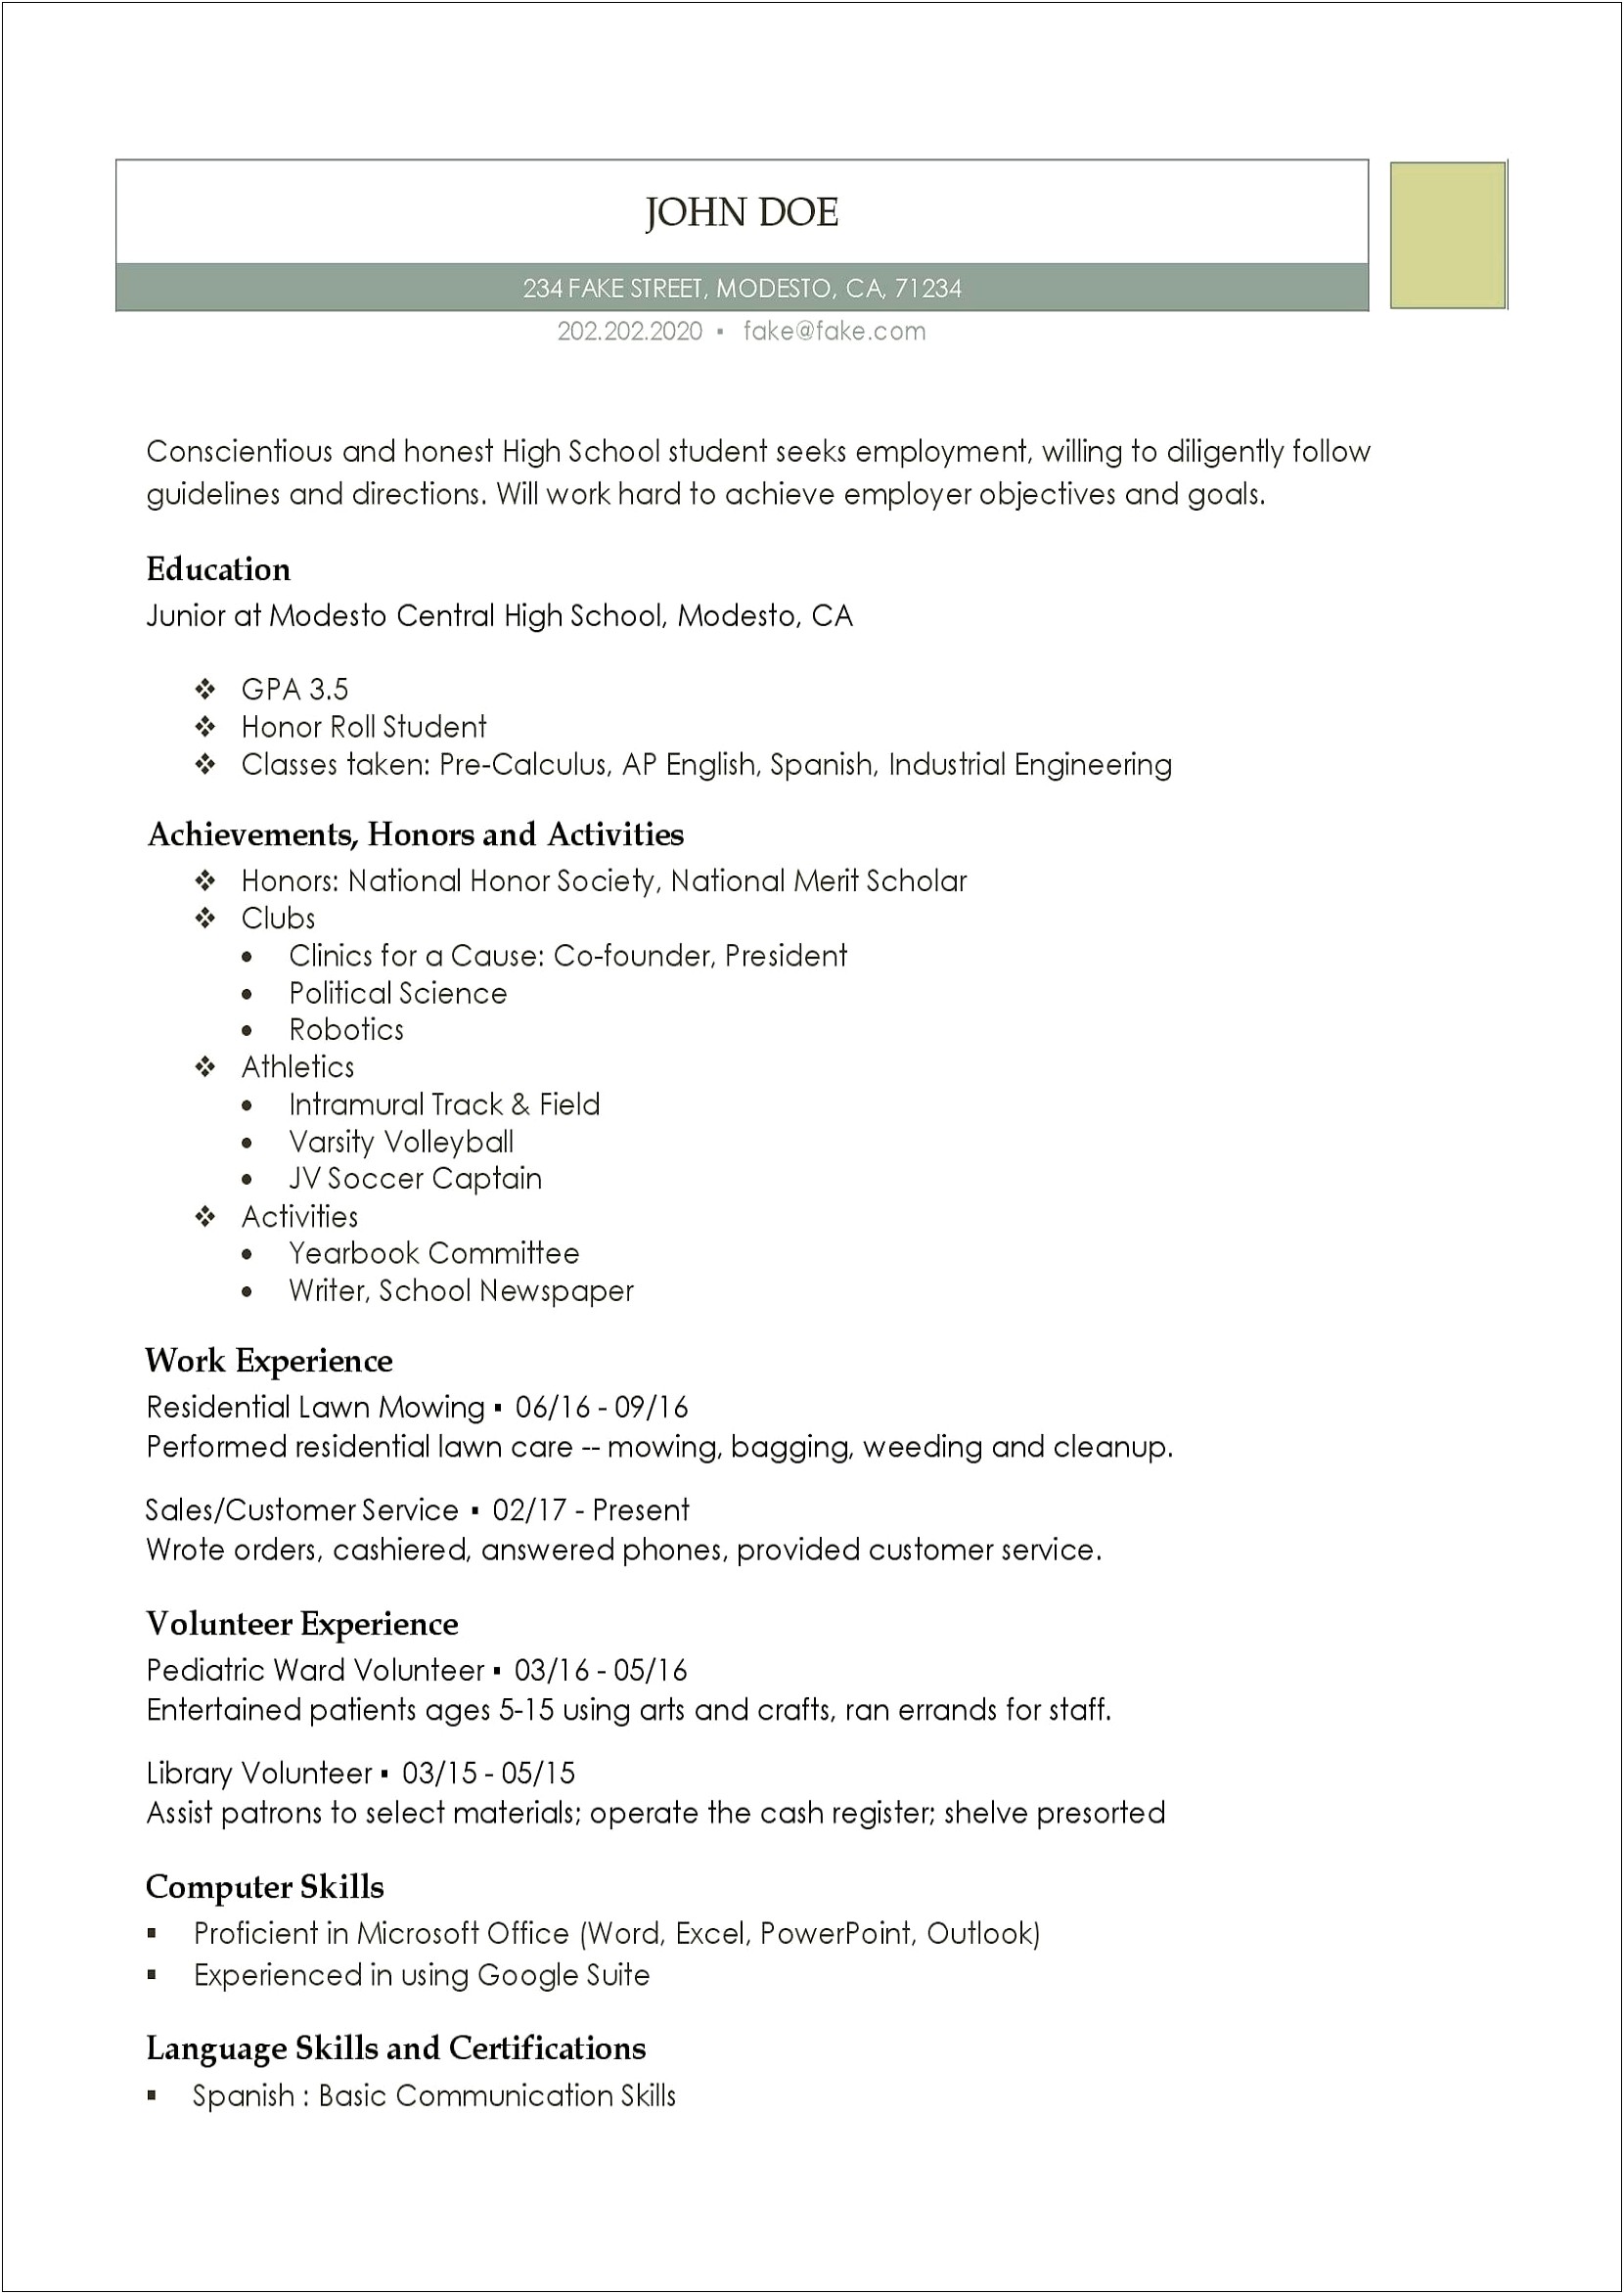 Princeton Review High School Resume Template